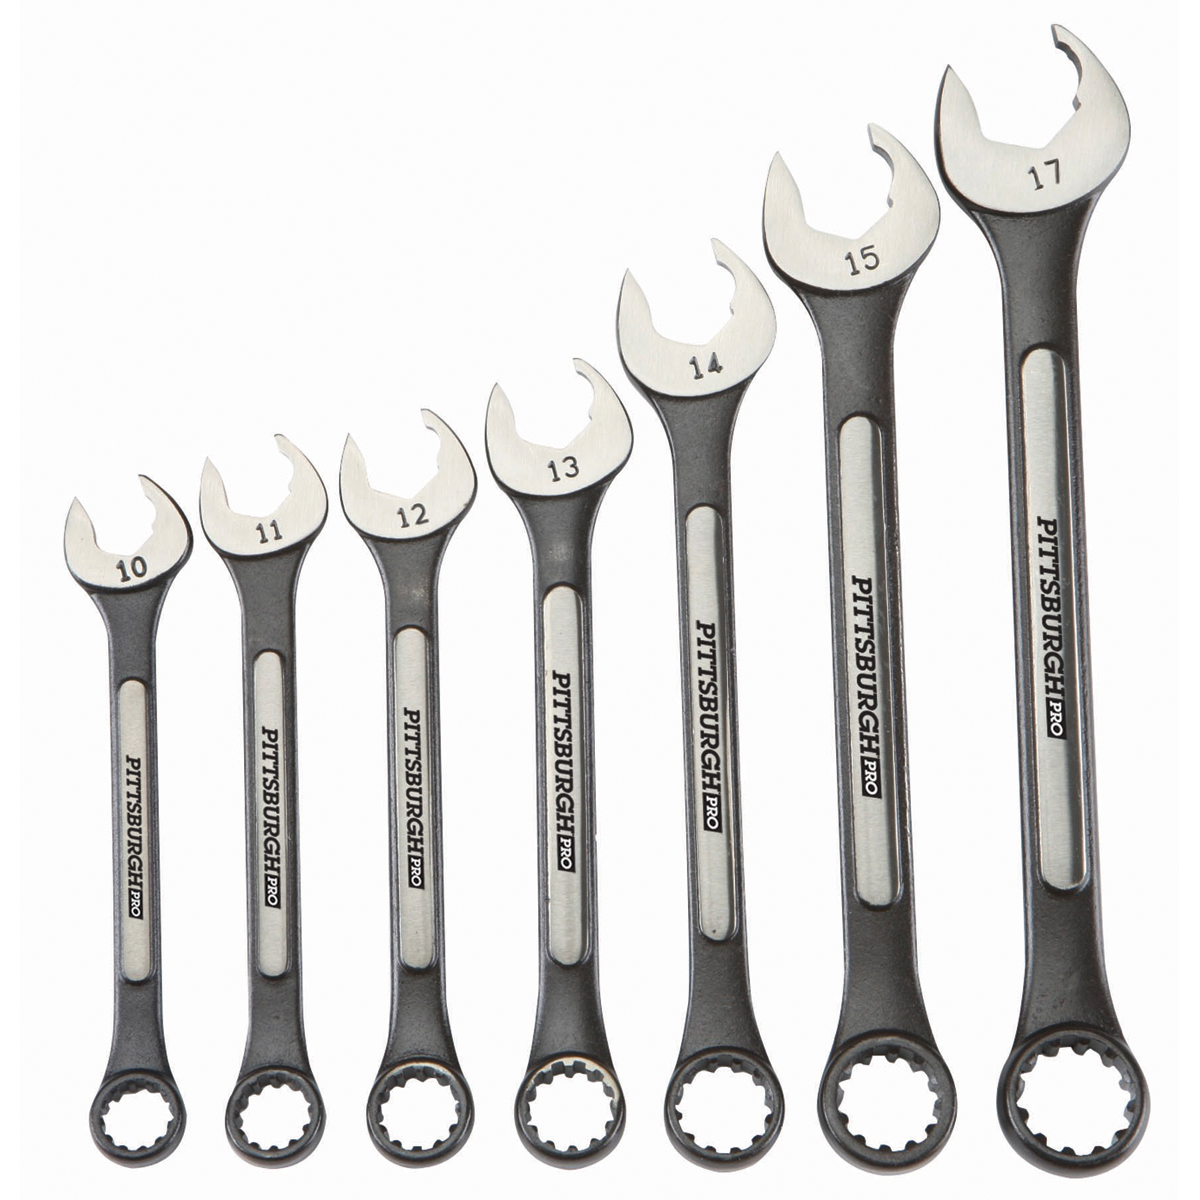 PITTSBURGH Universal Metric Combination Wrench Set – 7 Pc. – Item 69329